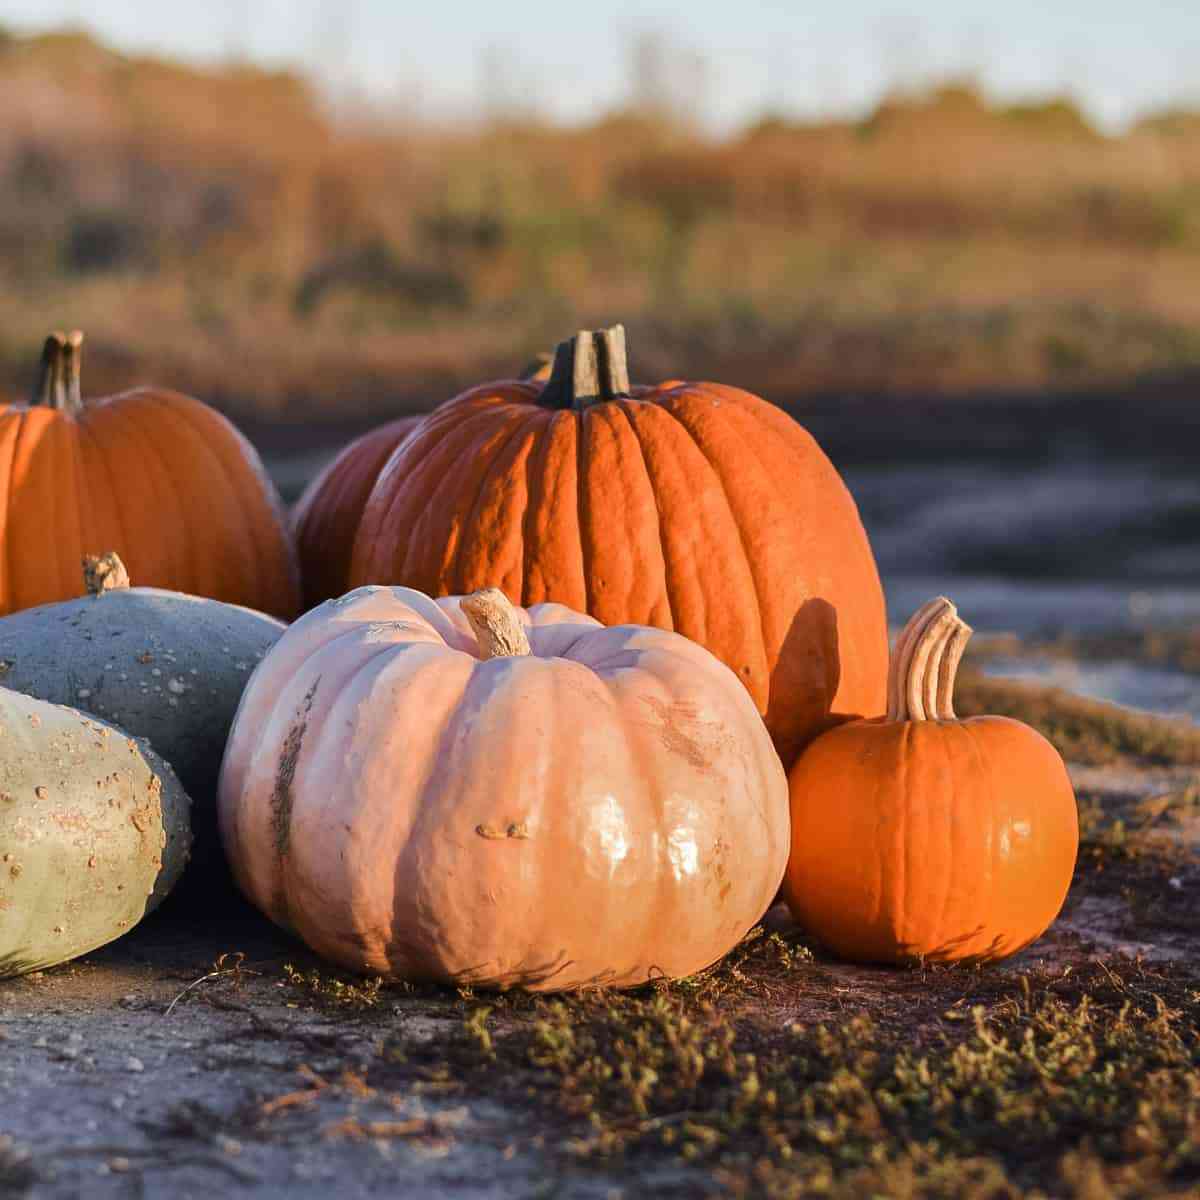 Rules and methods for storing pumpkins in winter